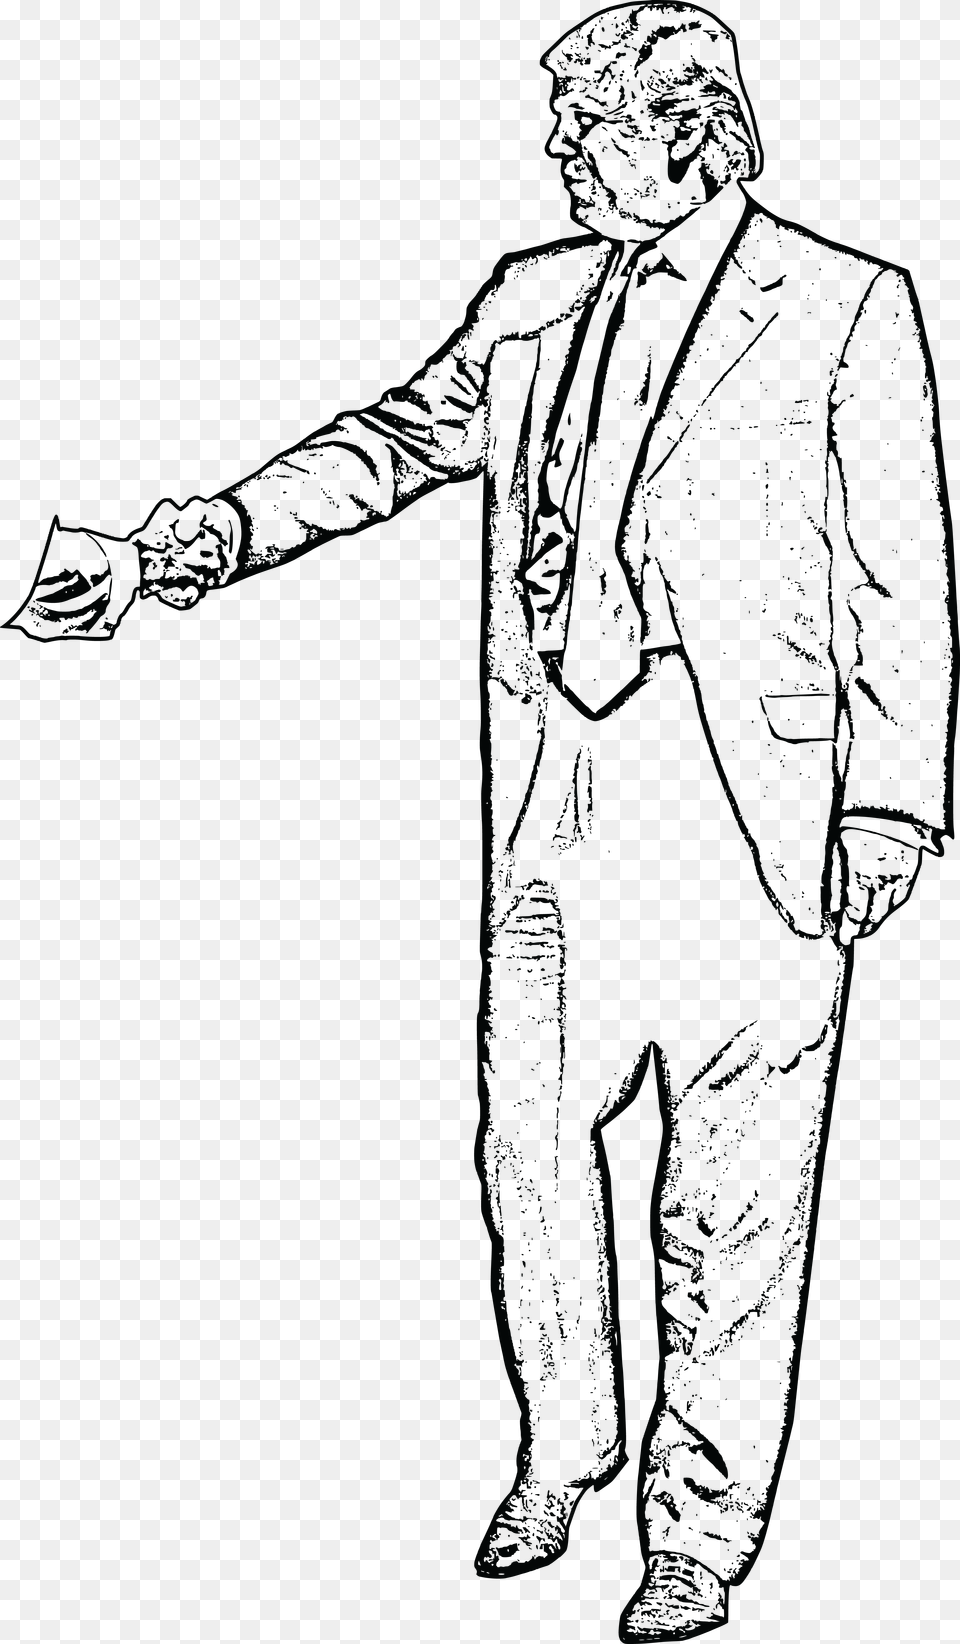 Free Clipart Of Donald Trump Shaking Hands Black And White Outline Of Donald Trump, Cross, Silhouette, Symbol, Person Png Image